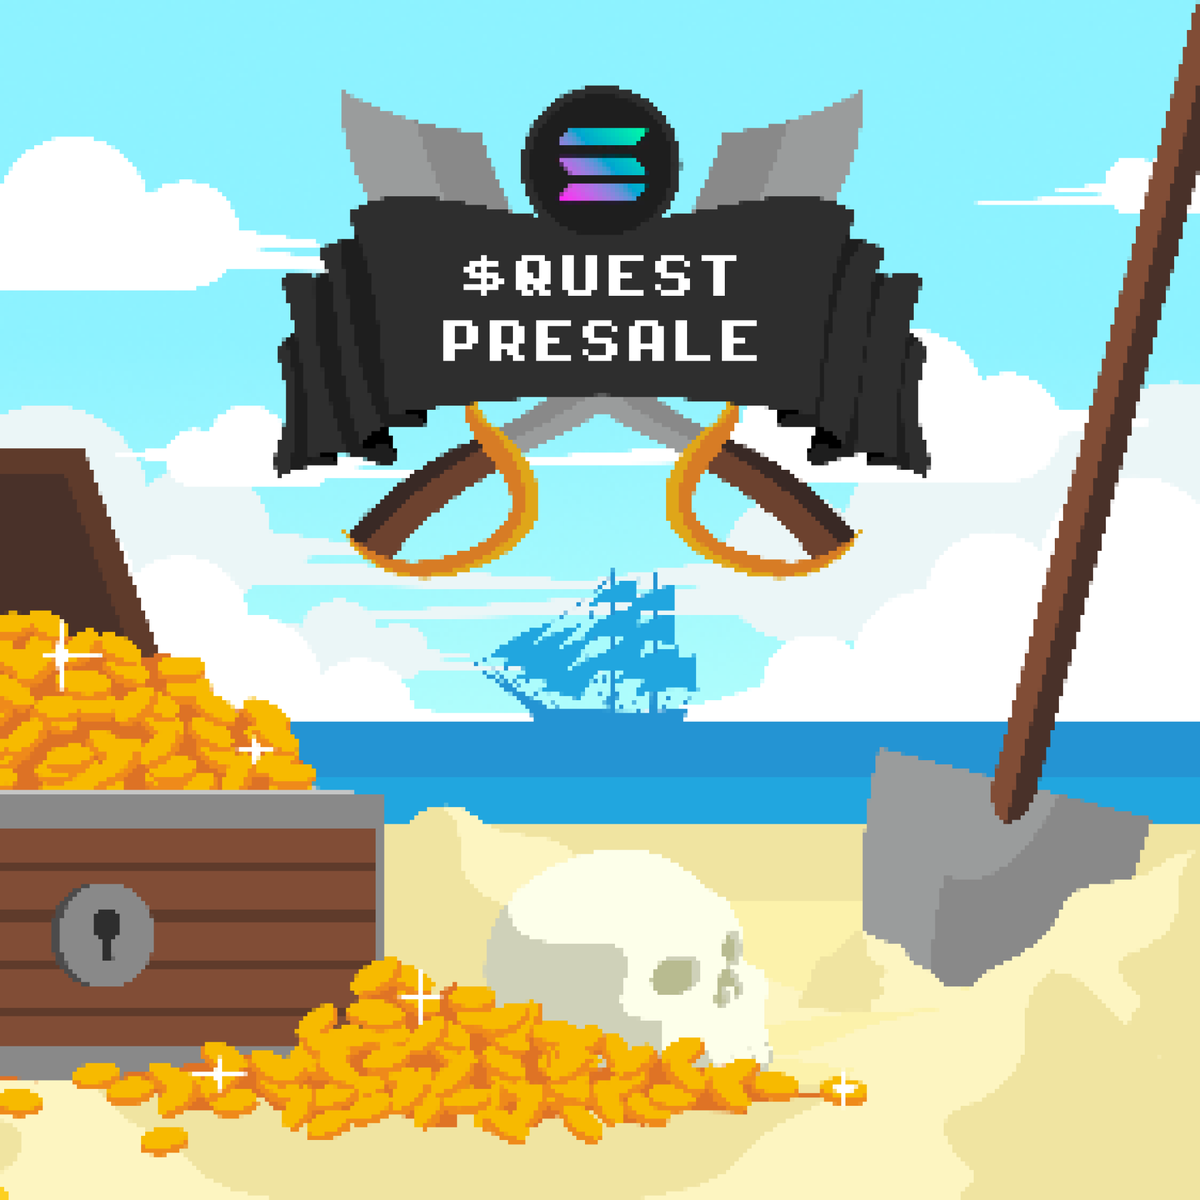 With the end of EPOCH 1, we'd like to announce our $SOL presale for $QUEST. 🏴‍☠️

Address: F81pJLS7gzo4oKaS35eFNU7Z2ueMrXpd4Ny2XzrZS6wS

Max: 5 SOL
Min: 1 SOL

- Only the first 1k wallets, rest is going to get a full refund.
We've structured this presale to reward investors